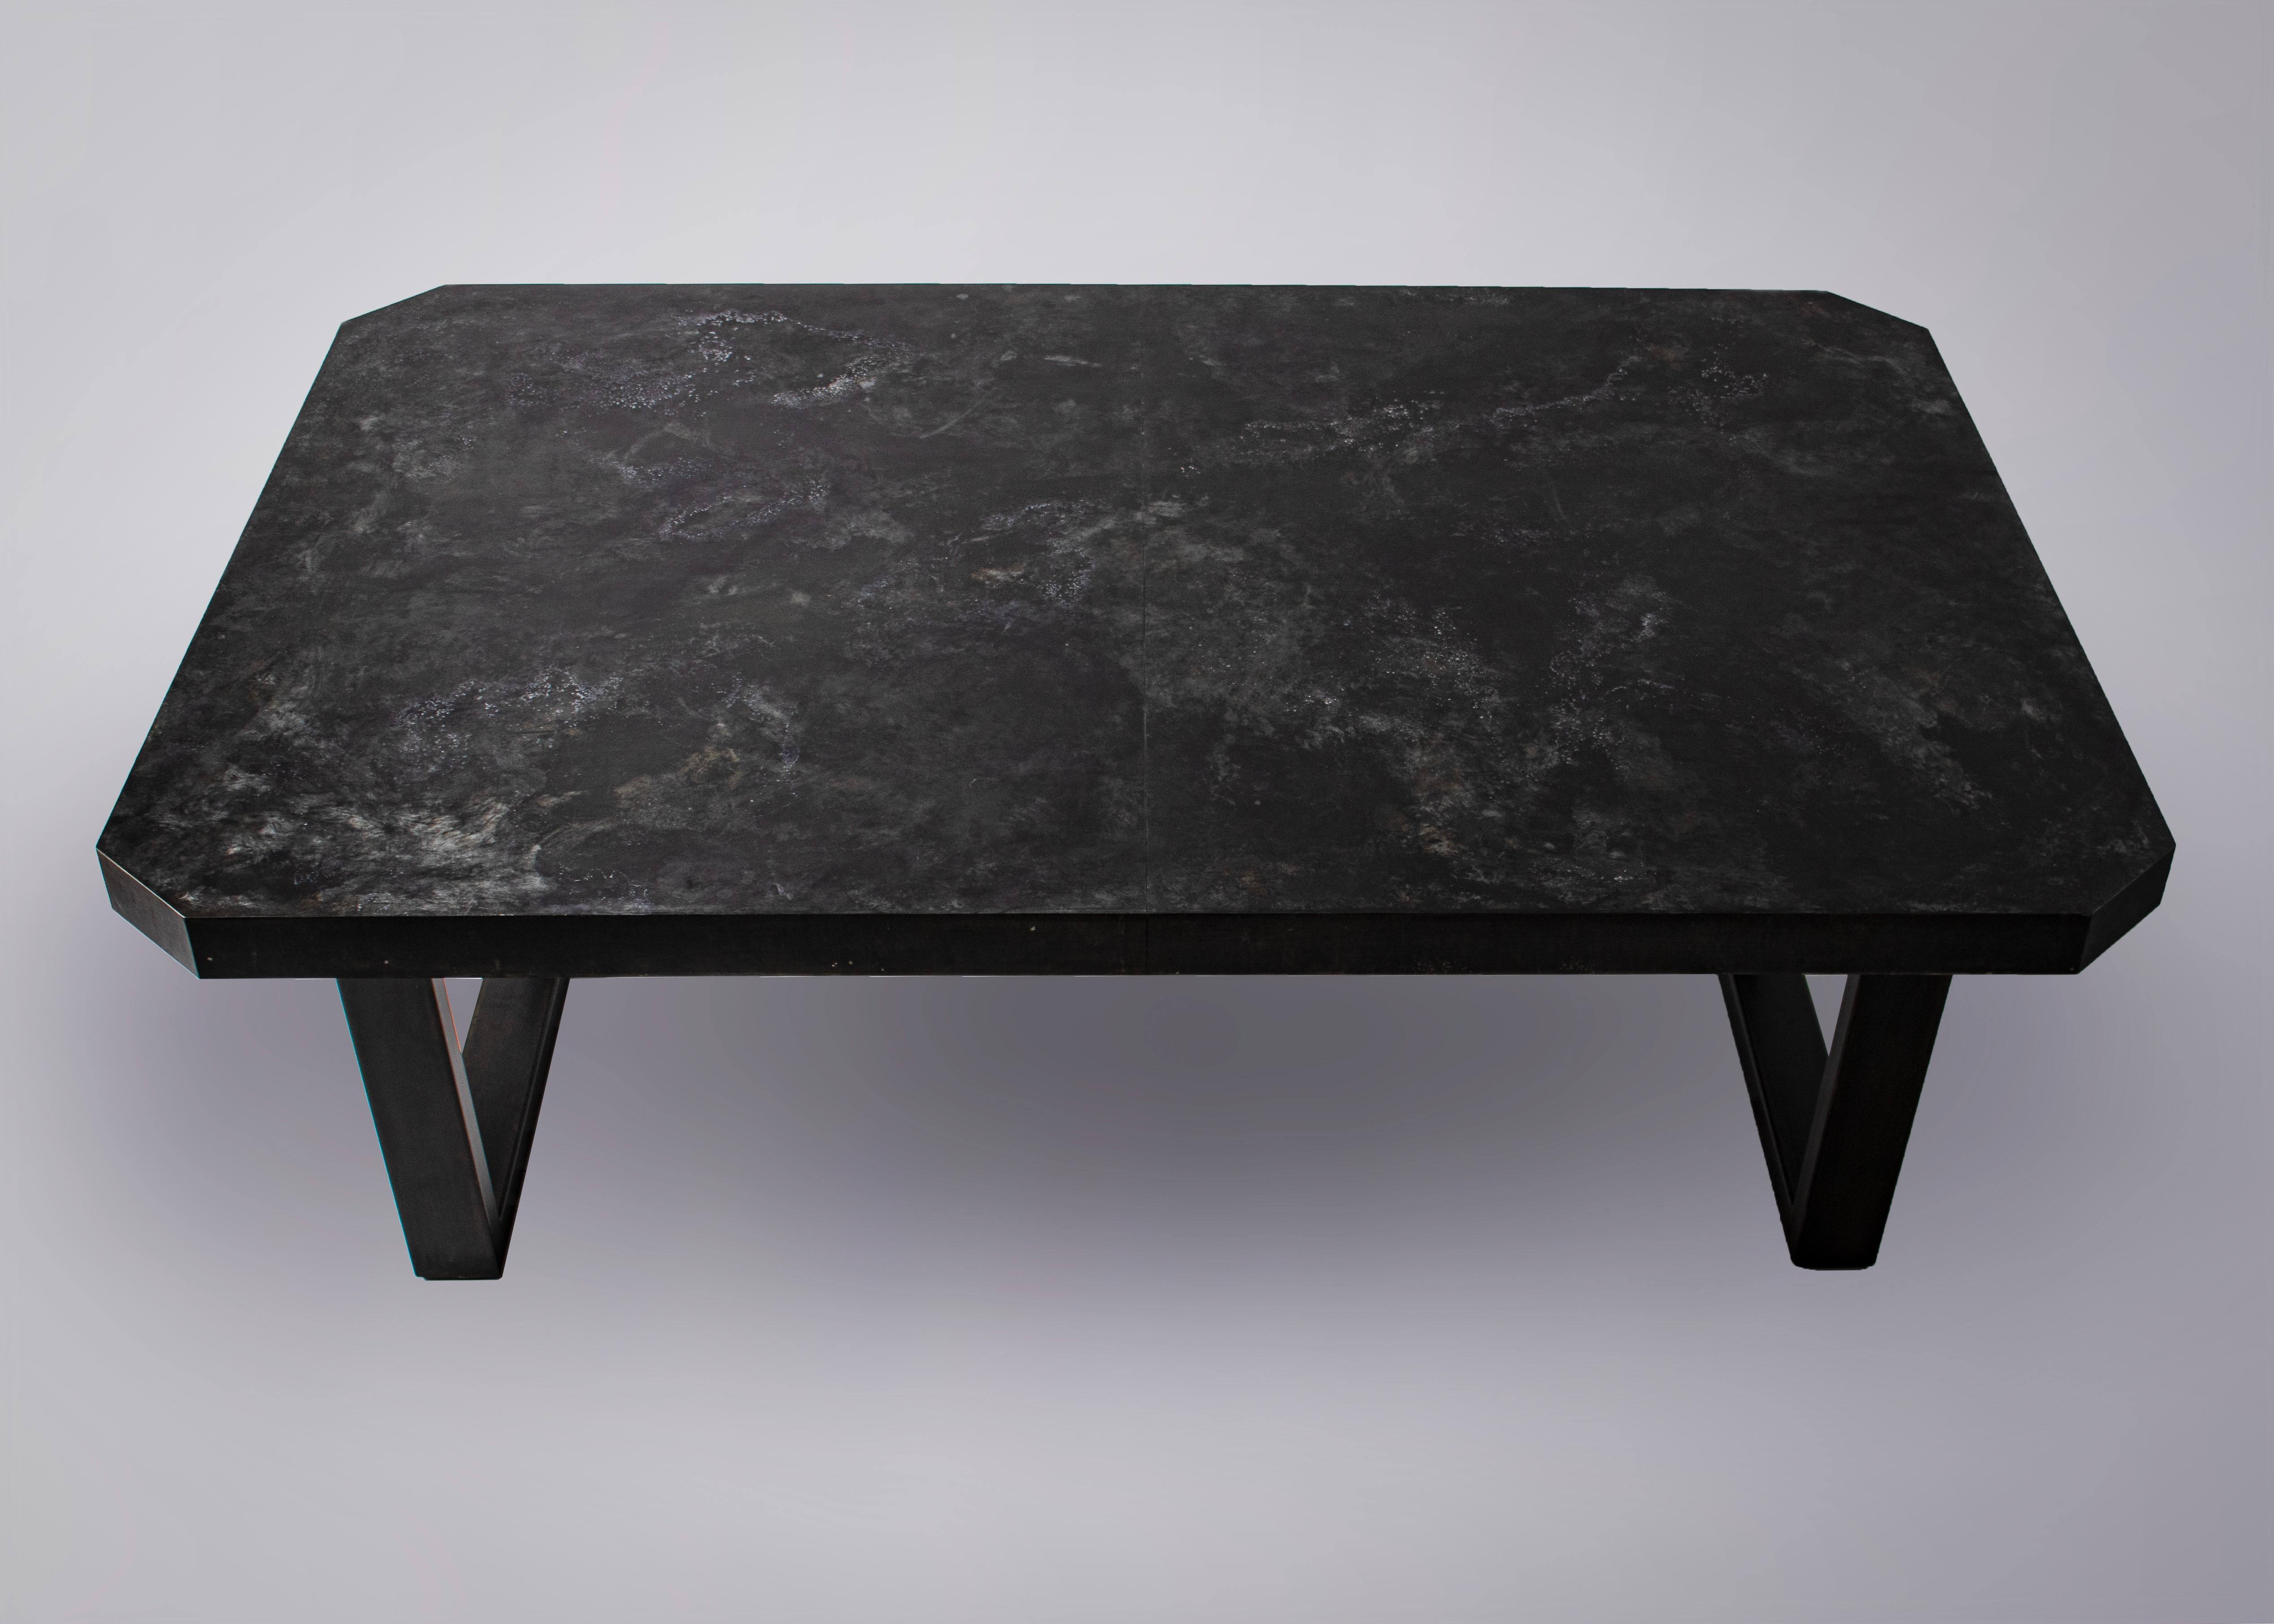 Custom distressed dark zink octogon shaped dining table with black hollow steel base.

Designed by Brendan Bass for the Vision and Design Collection, by using high quality materials and textures. All materials are sourced from local vendors